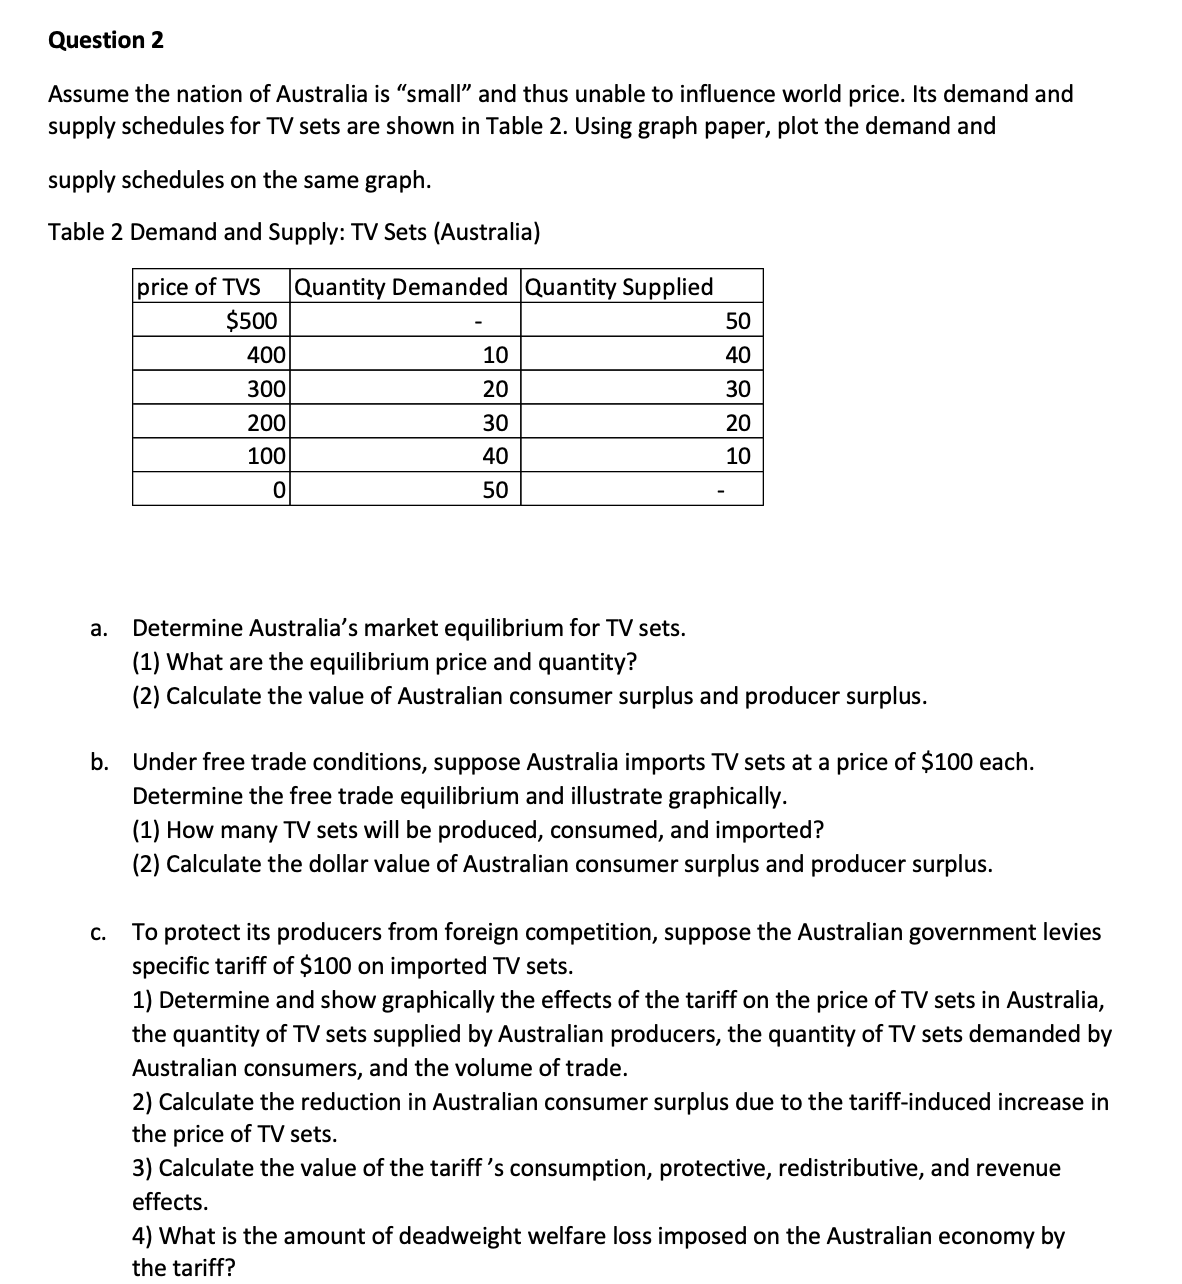 Question 2
Assume the nation of Australia is "small" and thus unable to influence world price. Its demand and
supply schedules for TV sets are shown in Table 2. Using graph paper, plot the demand and
supply schedules on the same graph.
Table 2 Demand and Supply: TV Sets (Australia)
a.
price of TVS Quantity Demanded Quantity Supplied
$500
C.
400
300
200
100
0
10
20
30
40
50
50
40
30
20
10
Determine Australia's market equilibrium for TV sets.
(1) What are the equilibrium price and quantity?
(2) Calculate the value of Australian consumer surplus and producer surplus.
b. Under free trade conditions, suppose Australia imports TV sets at a price of $100 each.
Determine the free trade equilibrium and illustrate graphically.
(1) How many TV sets will be produced, consumed, and imported?
(2) Calculate the dollar value of Australian consumer surplus and producer surplus.
To protect its producers from foreign competition, suppose the Australian government levies
specific tariff of $100 on imported TV sets.
1) Determine and show graphically the effects of the tariff on the price of TV sets in Australia,
the quantity of TV sets supplied by Australian producers, the quantity of TV sets demanded by
Australian consumers, and the volume of trade.
2) Calculate the reduction in Australian consumer surplus due to the tariff-induced increase in
the price of TV sets.
3) Calculate the value of the tariff's consumption, protective, redistributive, and revenue
effects.
4) What is the amount of deadweight welfare loss imposed on the Australian economy by
the tariff?